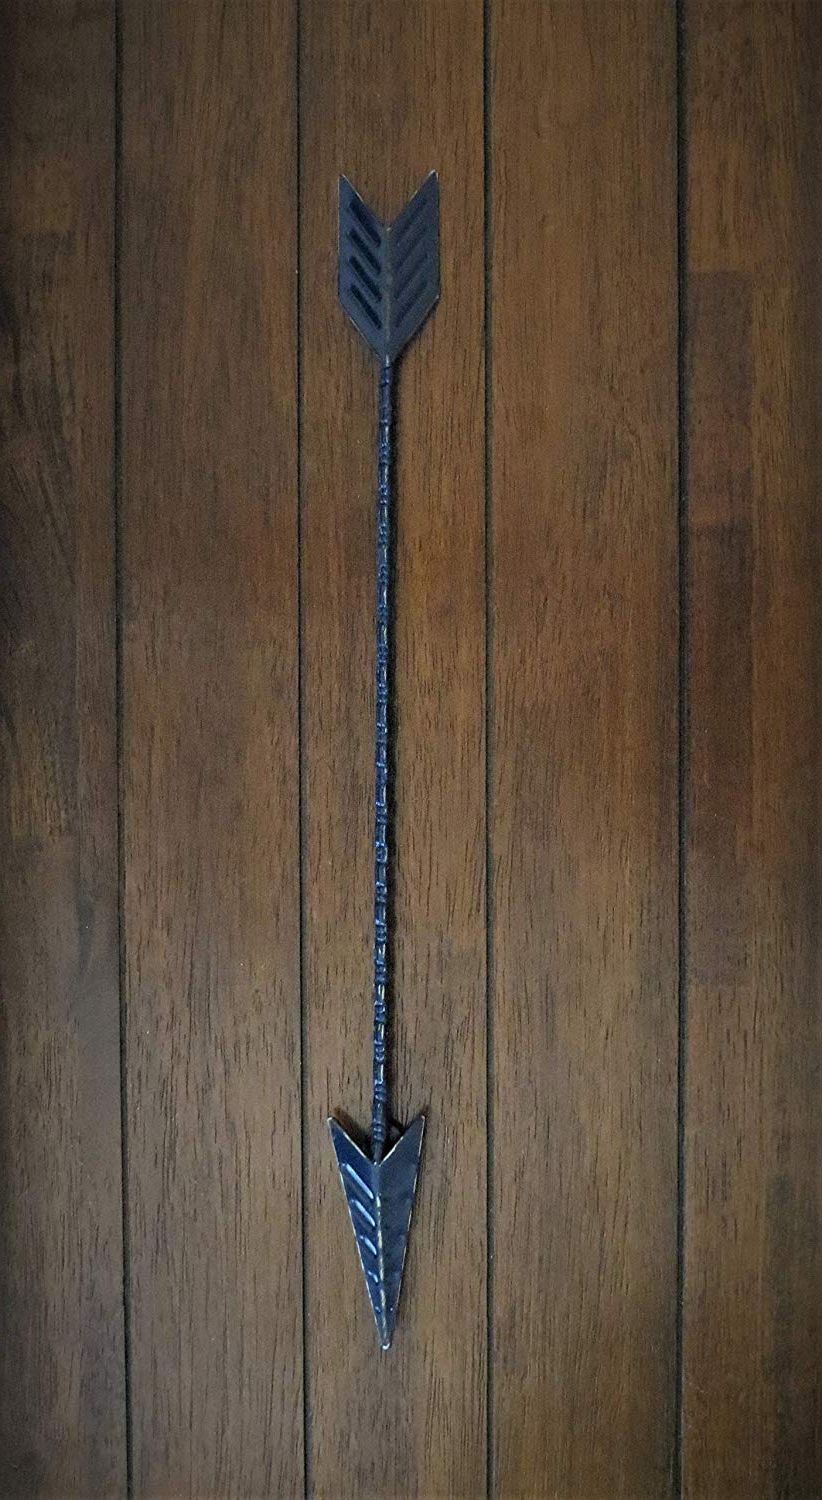 Popular Brown Metal Tribal Arrow Wall Decor In Amazon: Metal Arrow For Wall Hanging Navy Blue Or Pick Color (View 6 of 20)